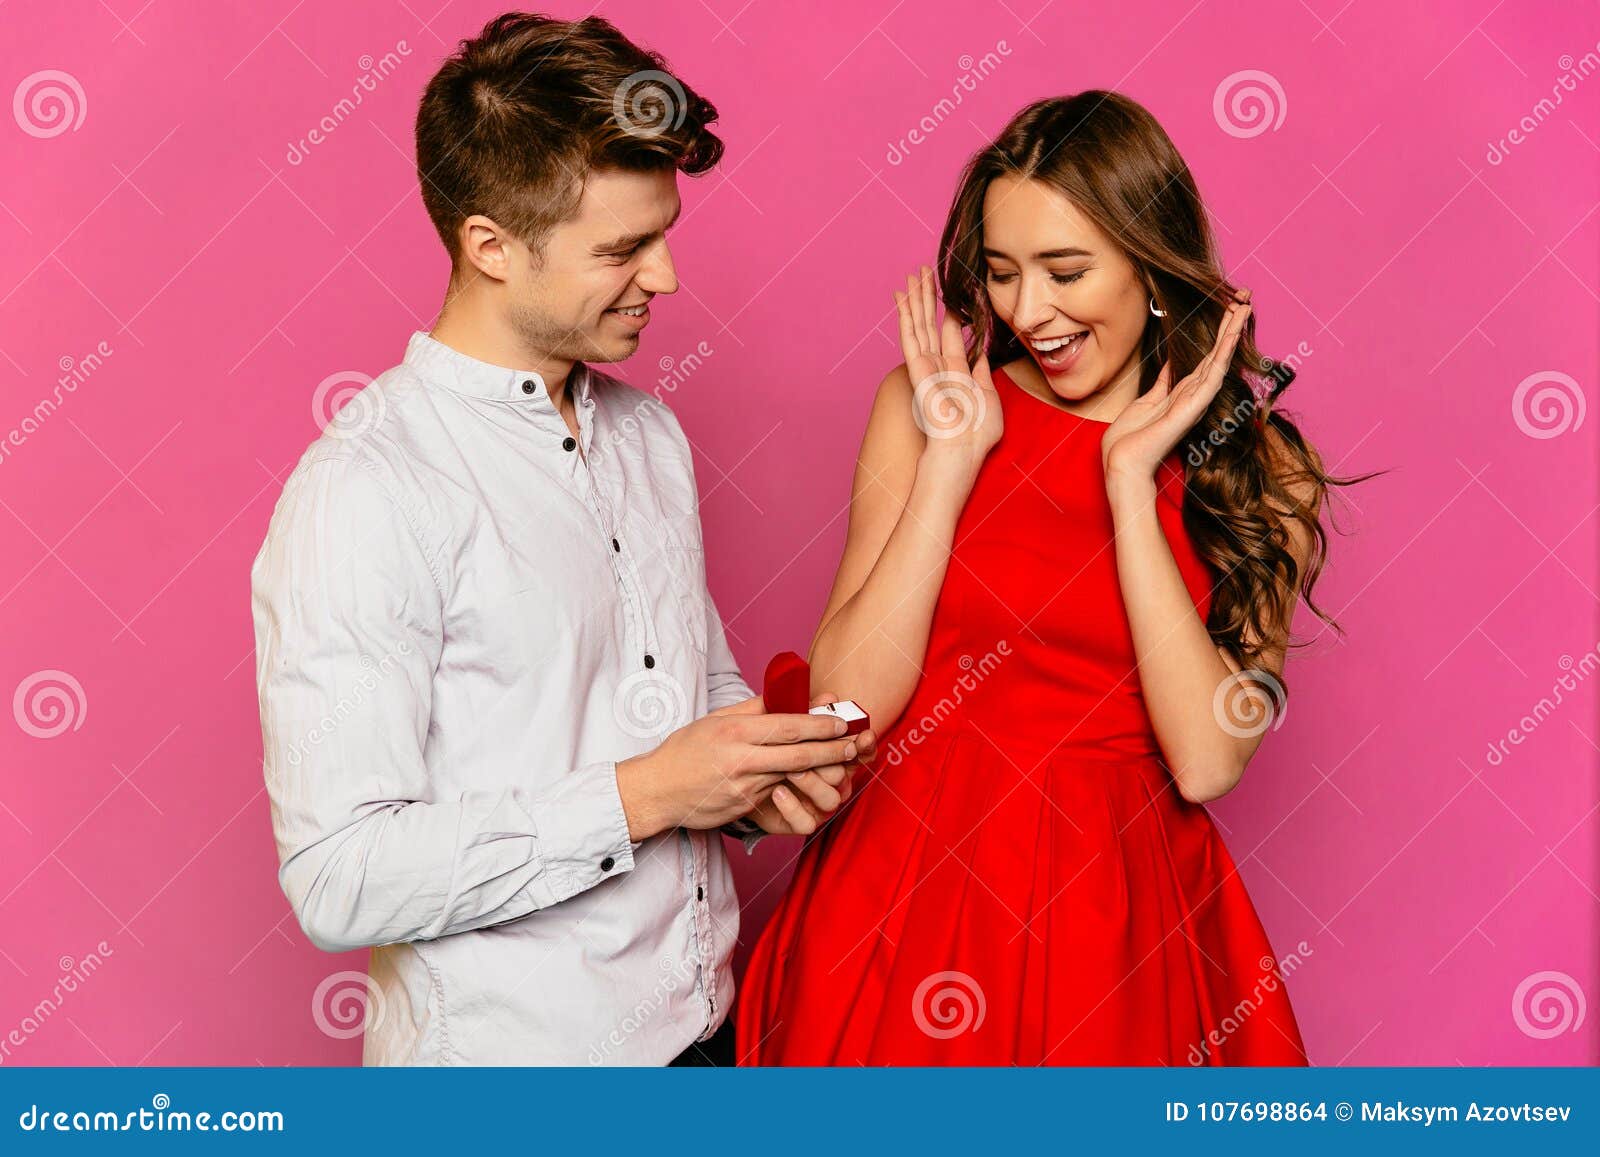 https://thumbs.dreamstime.com/z/man-going-to-make-marriage-proposal-to-his-girlfriend-handsome-men-makes-proposal-to-his-gorgeous-girlfriend-red-dress-107698864.jpg